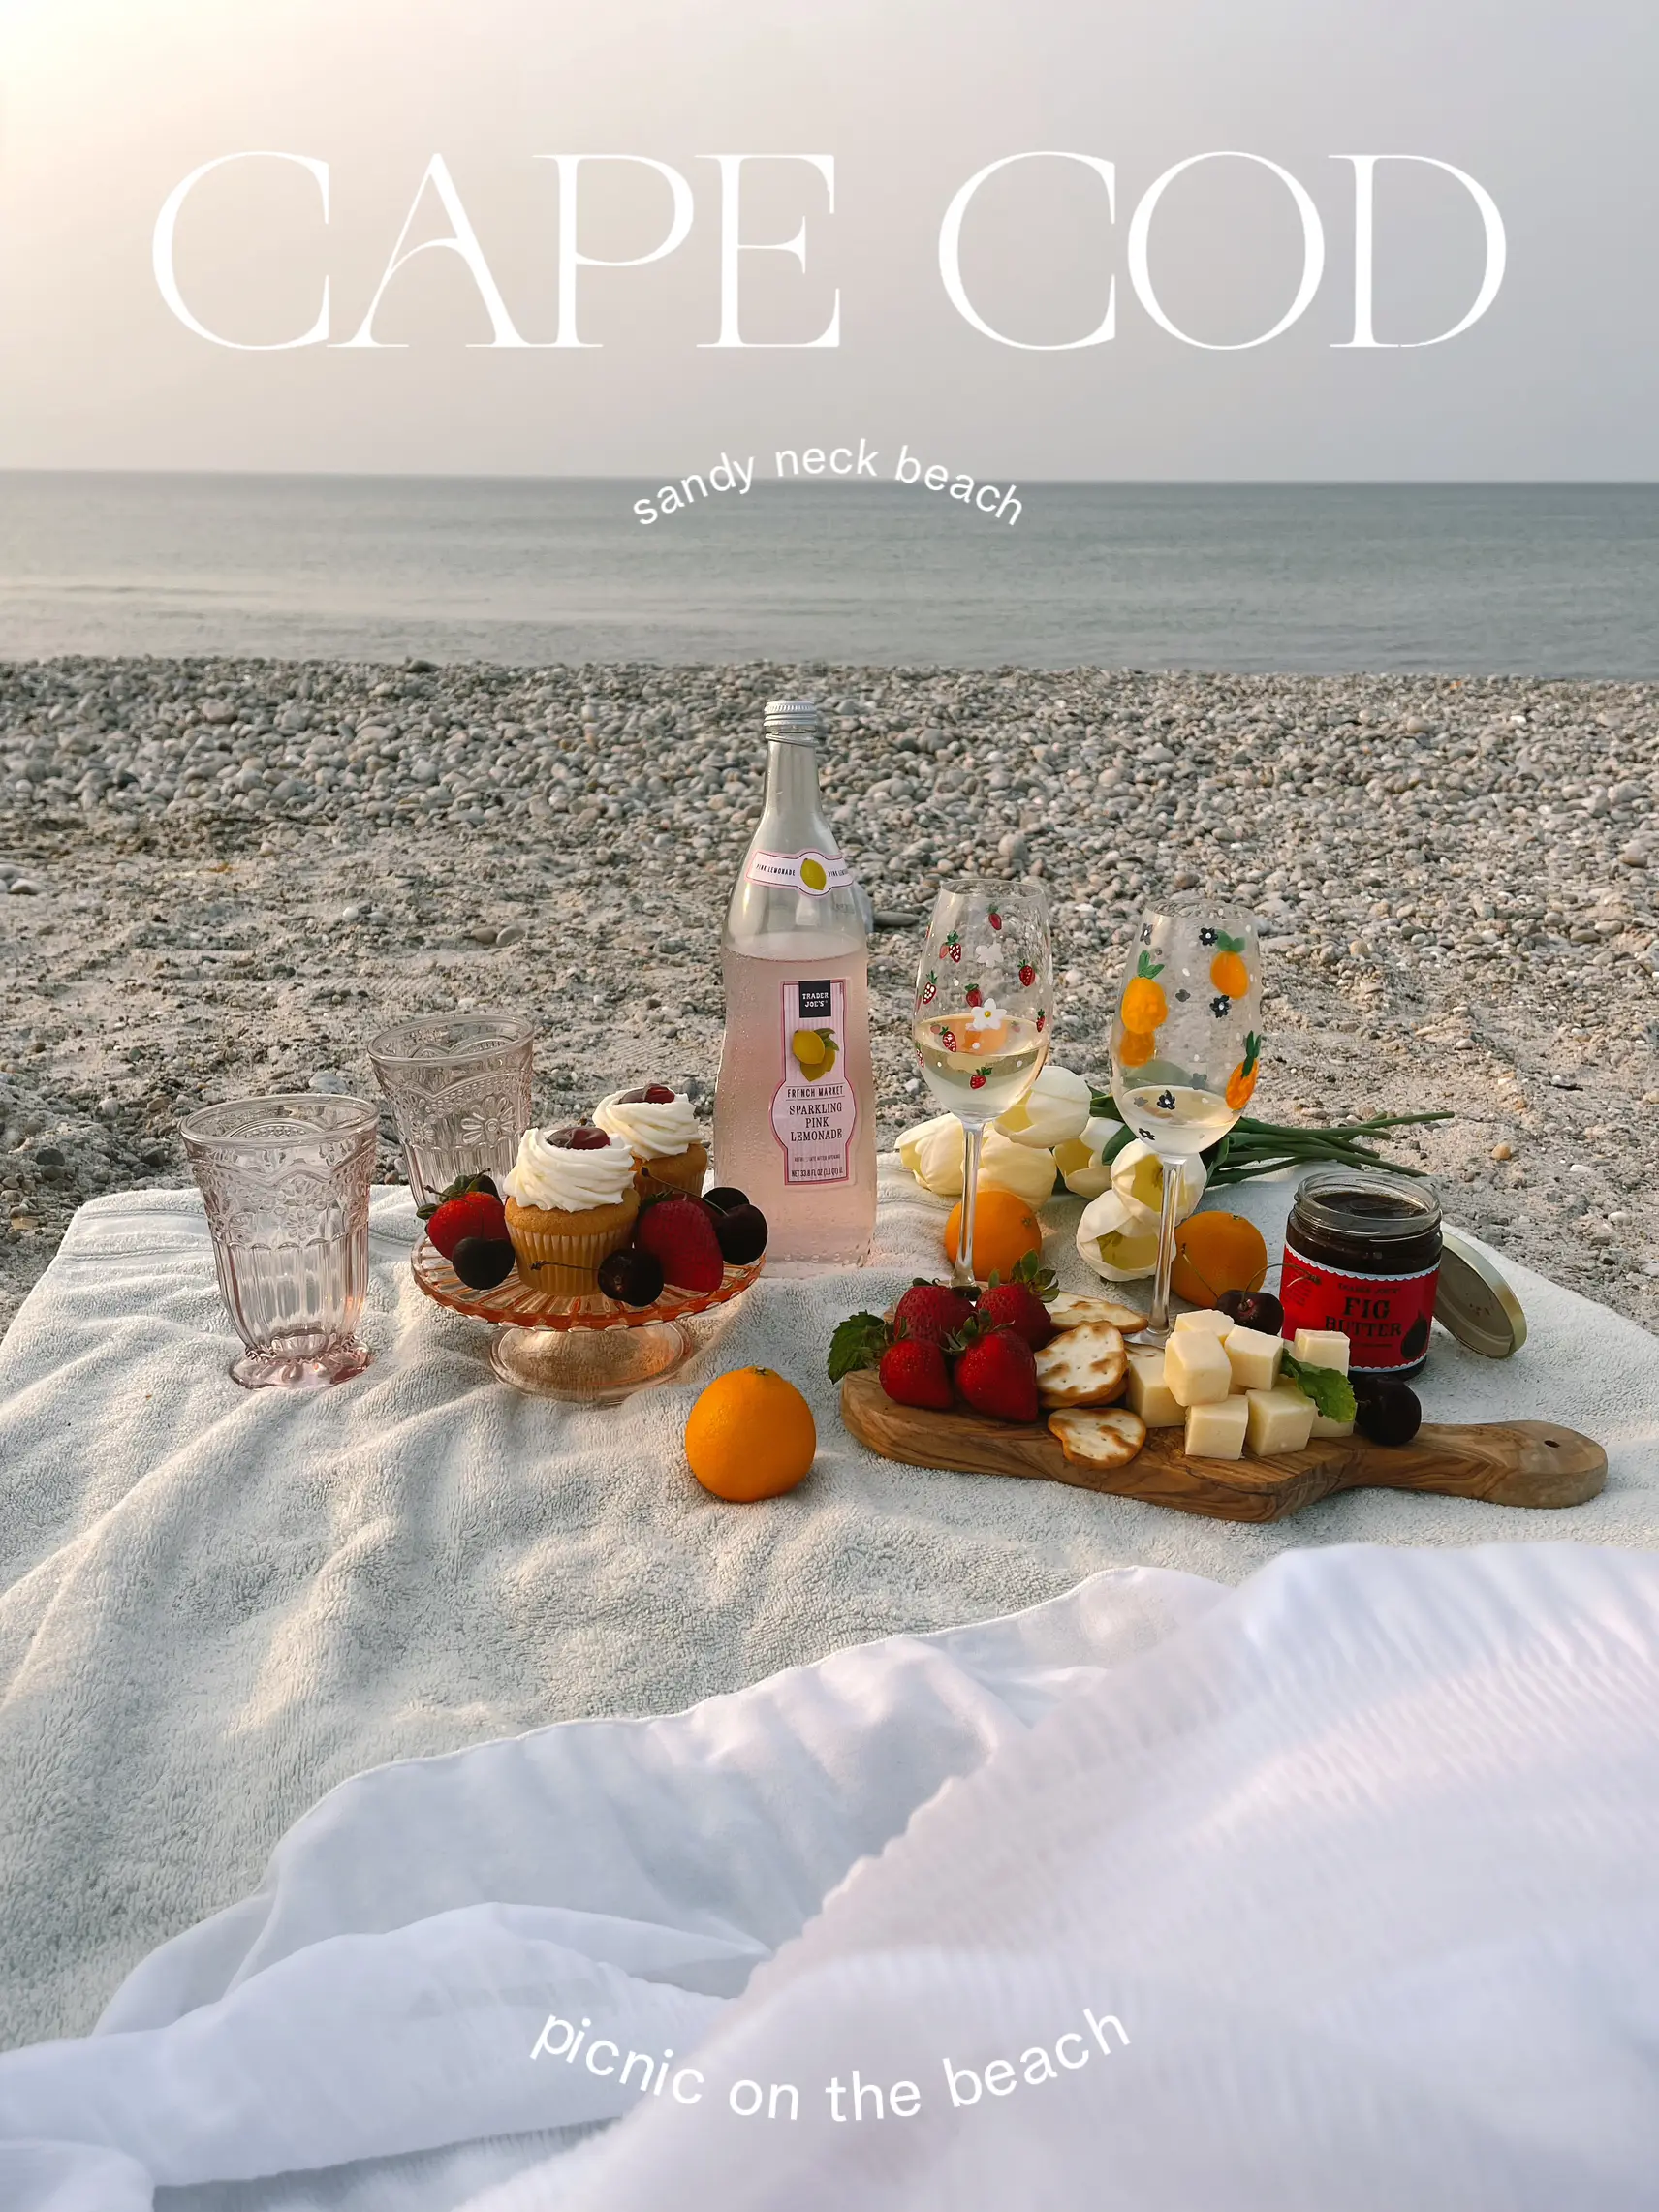 pinterest beach picnic must haves in cape cod 🐚🌊🍋's images(0)